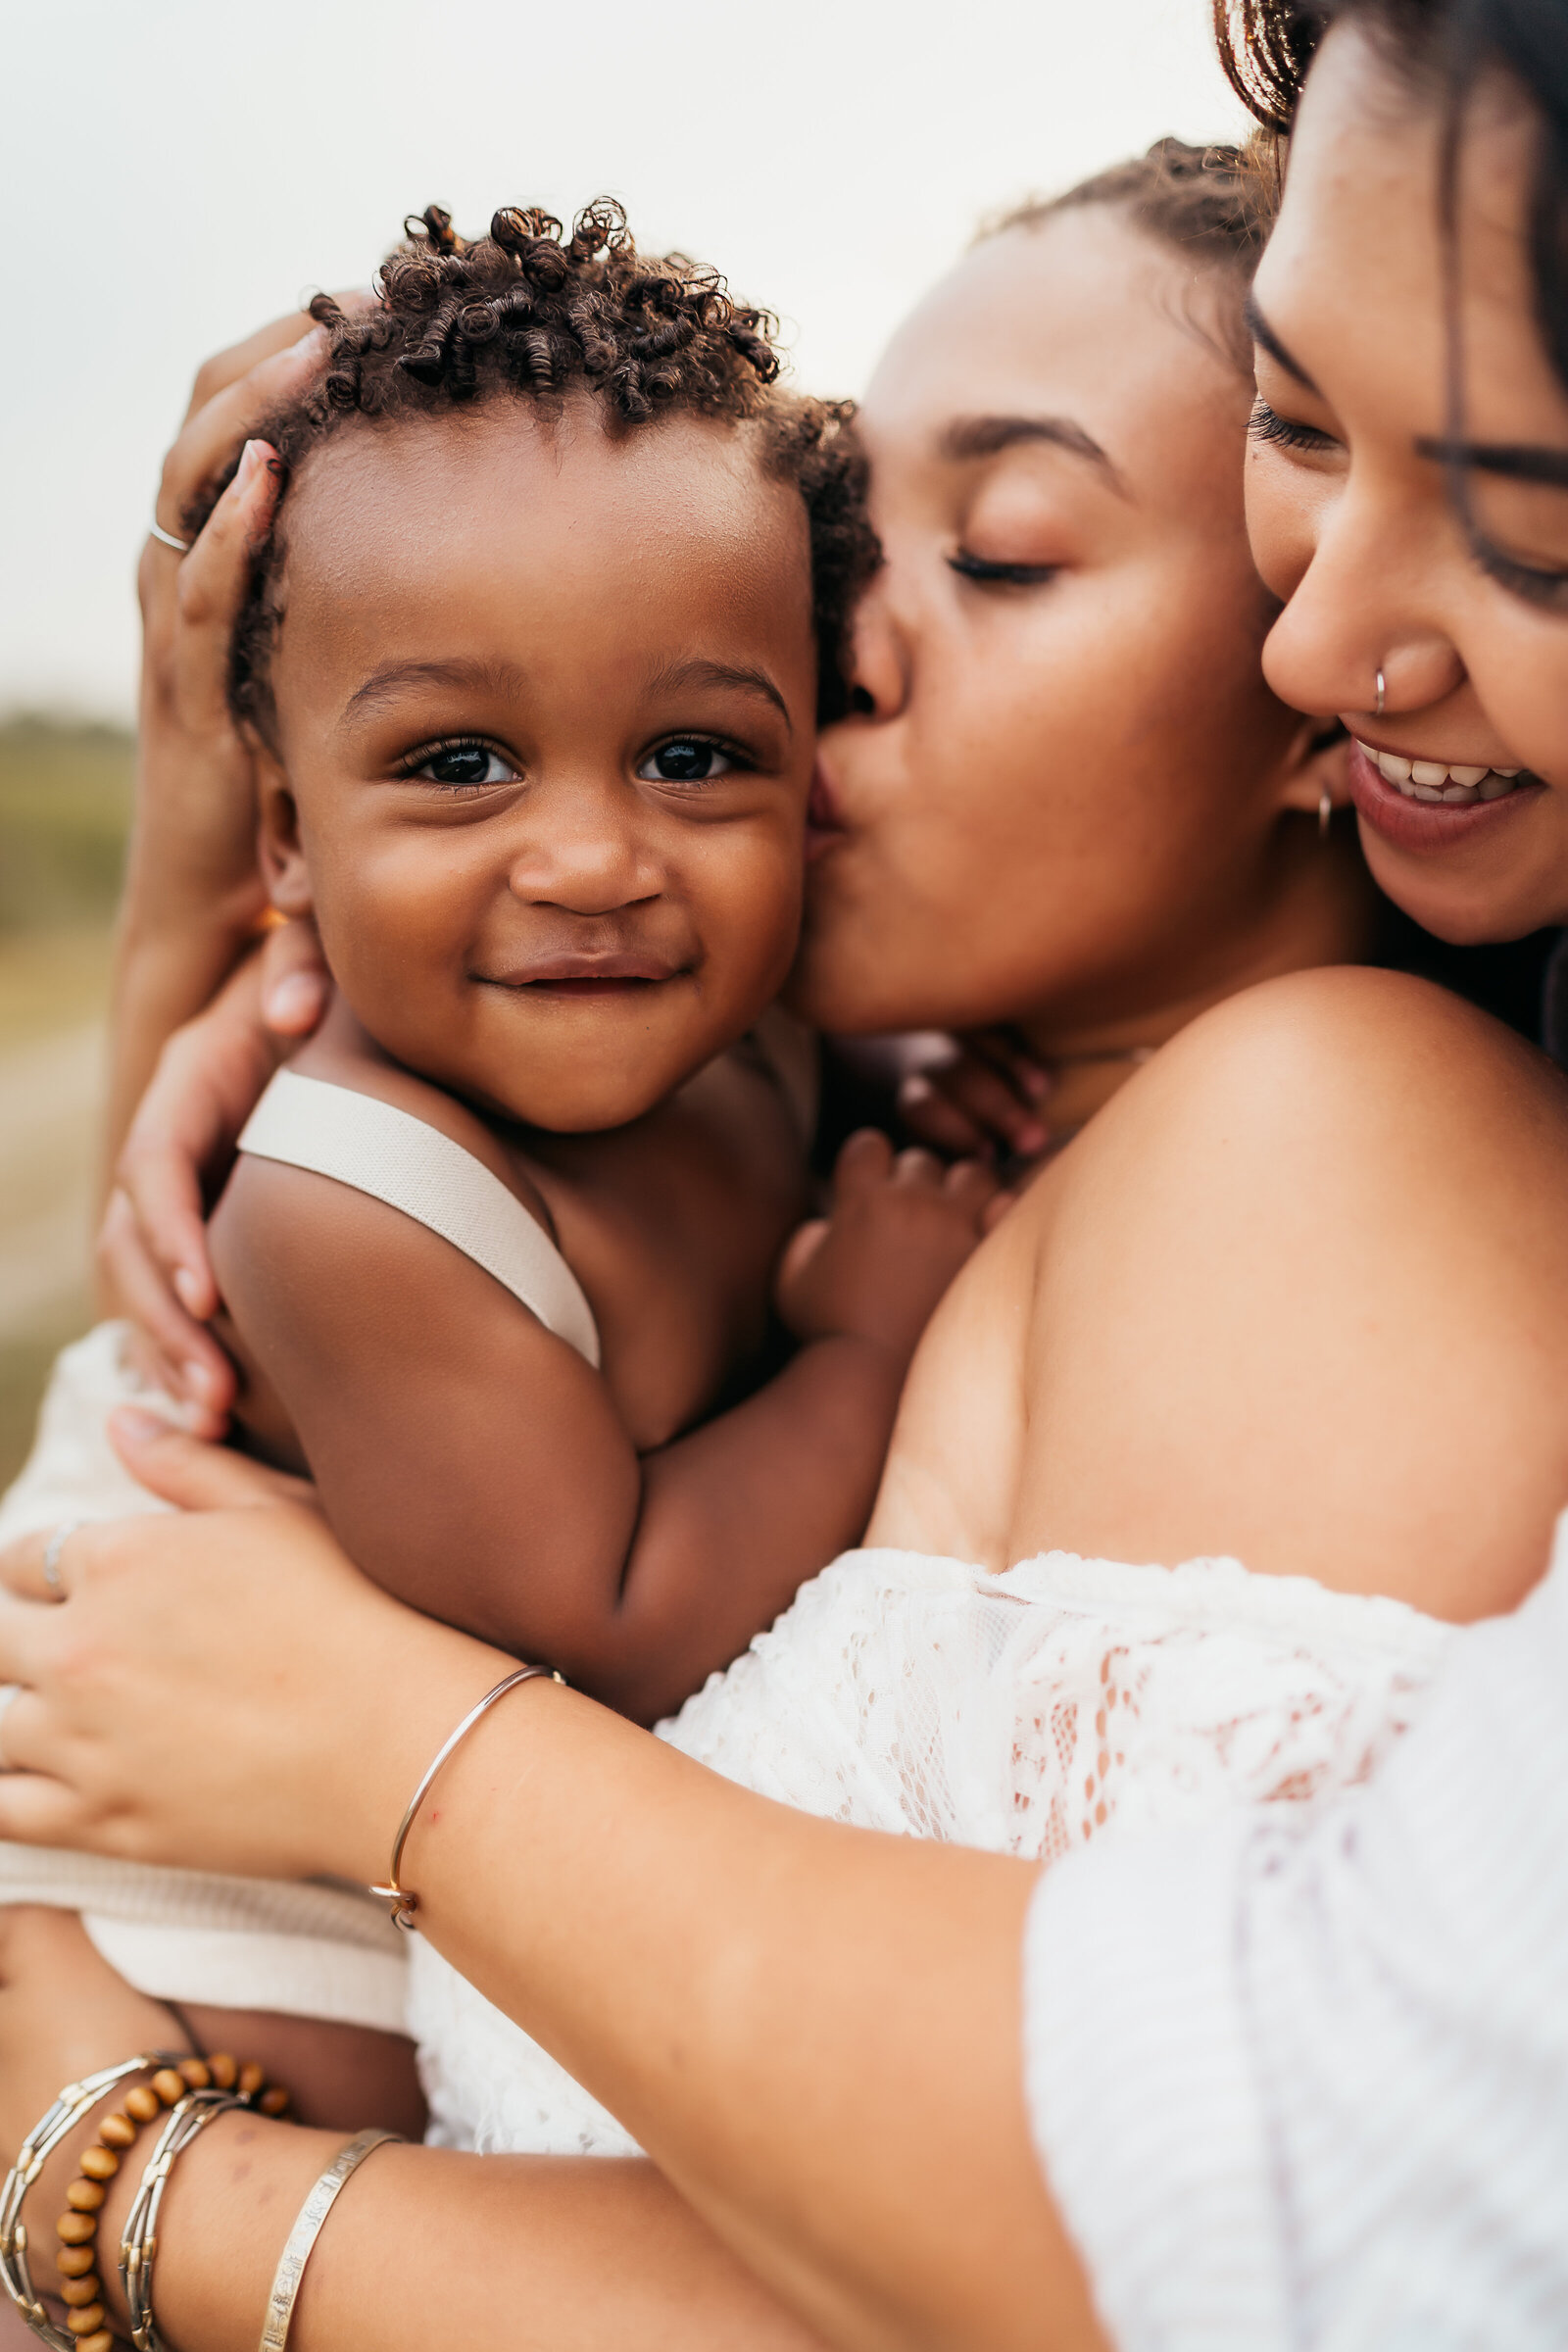 moms holding baby boy and kissing his cheek during a st. louis family photo shoot